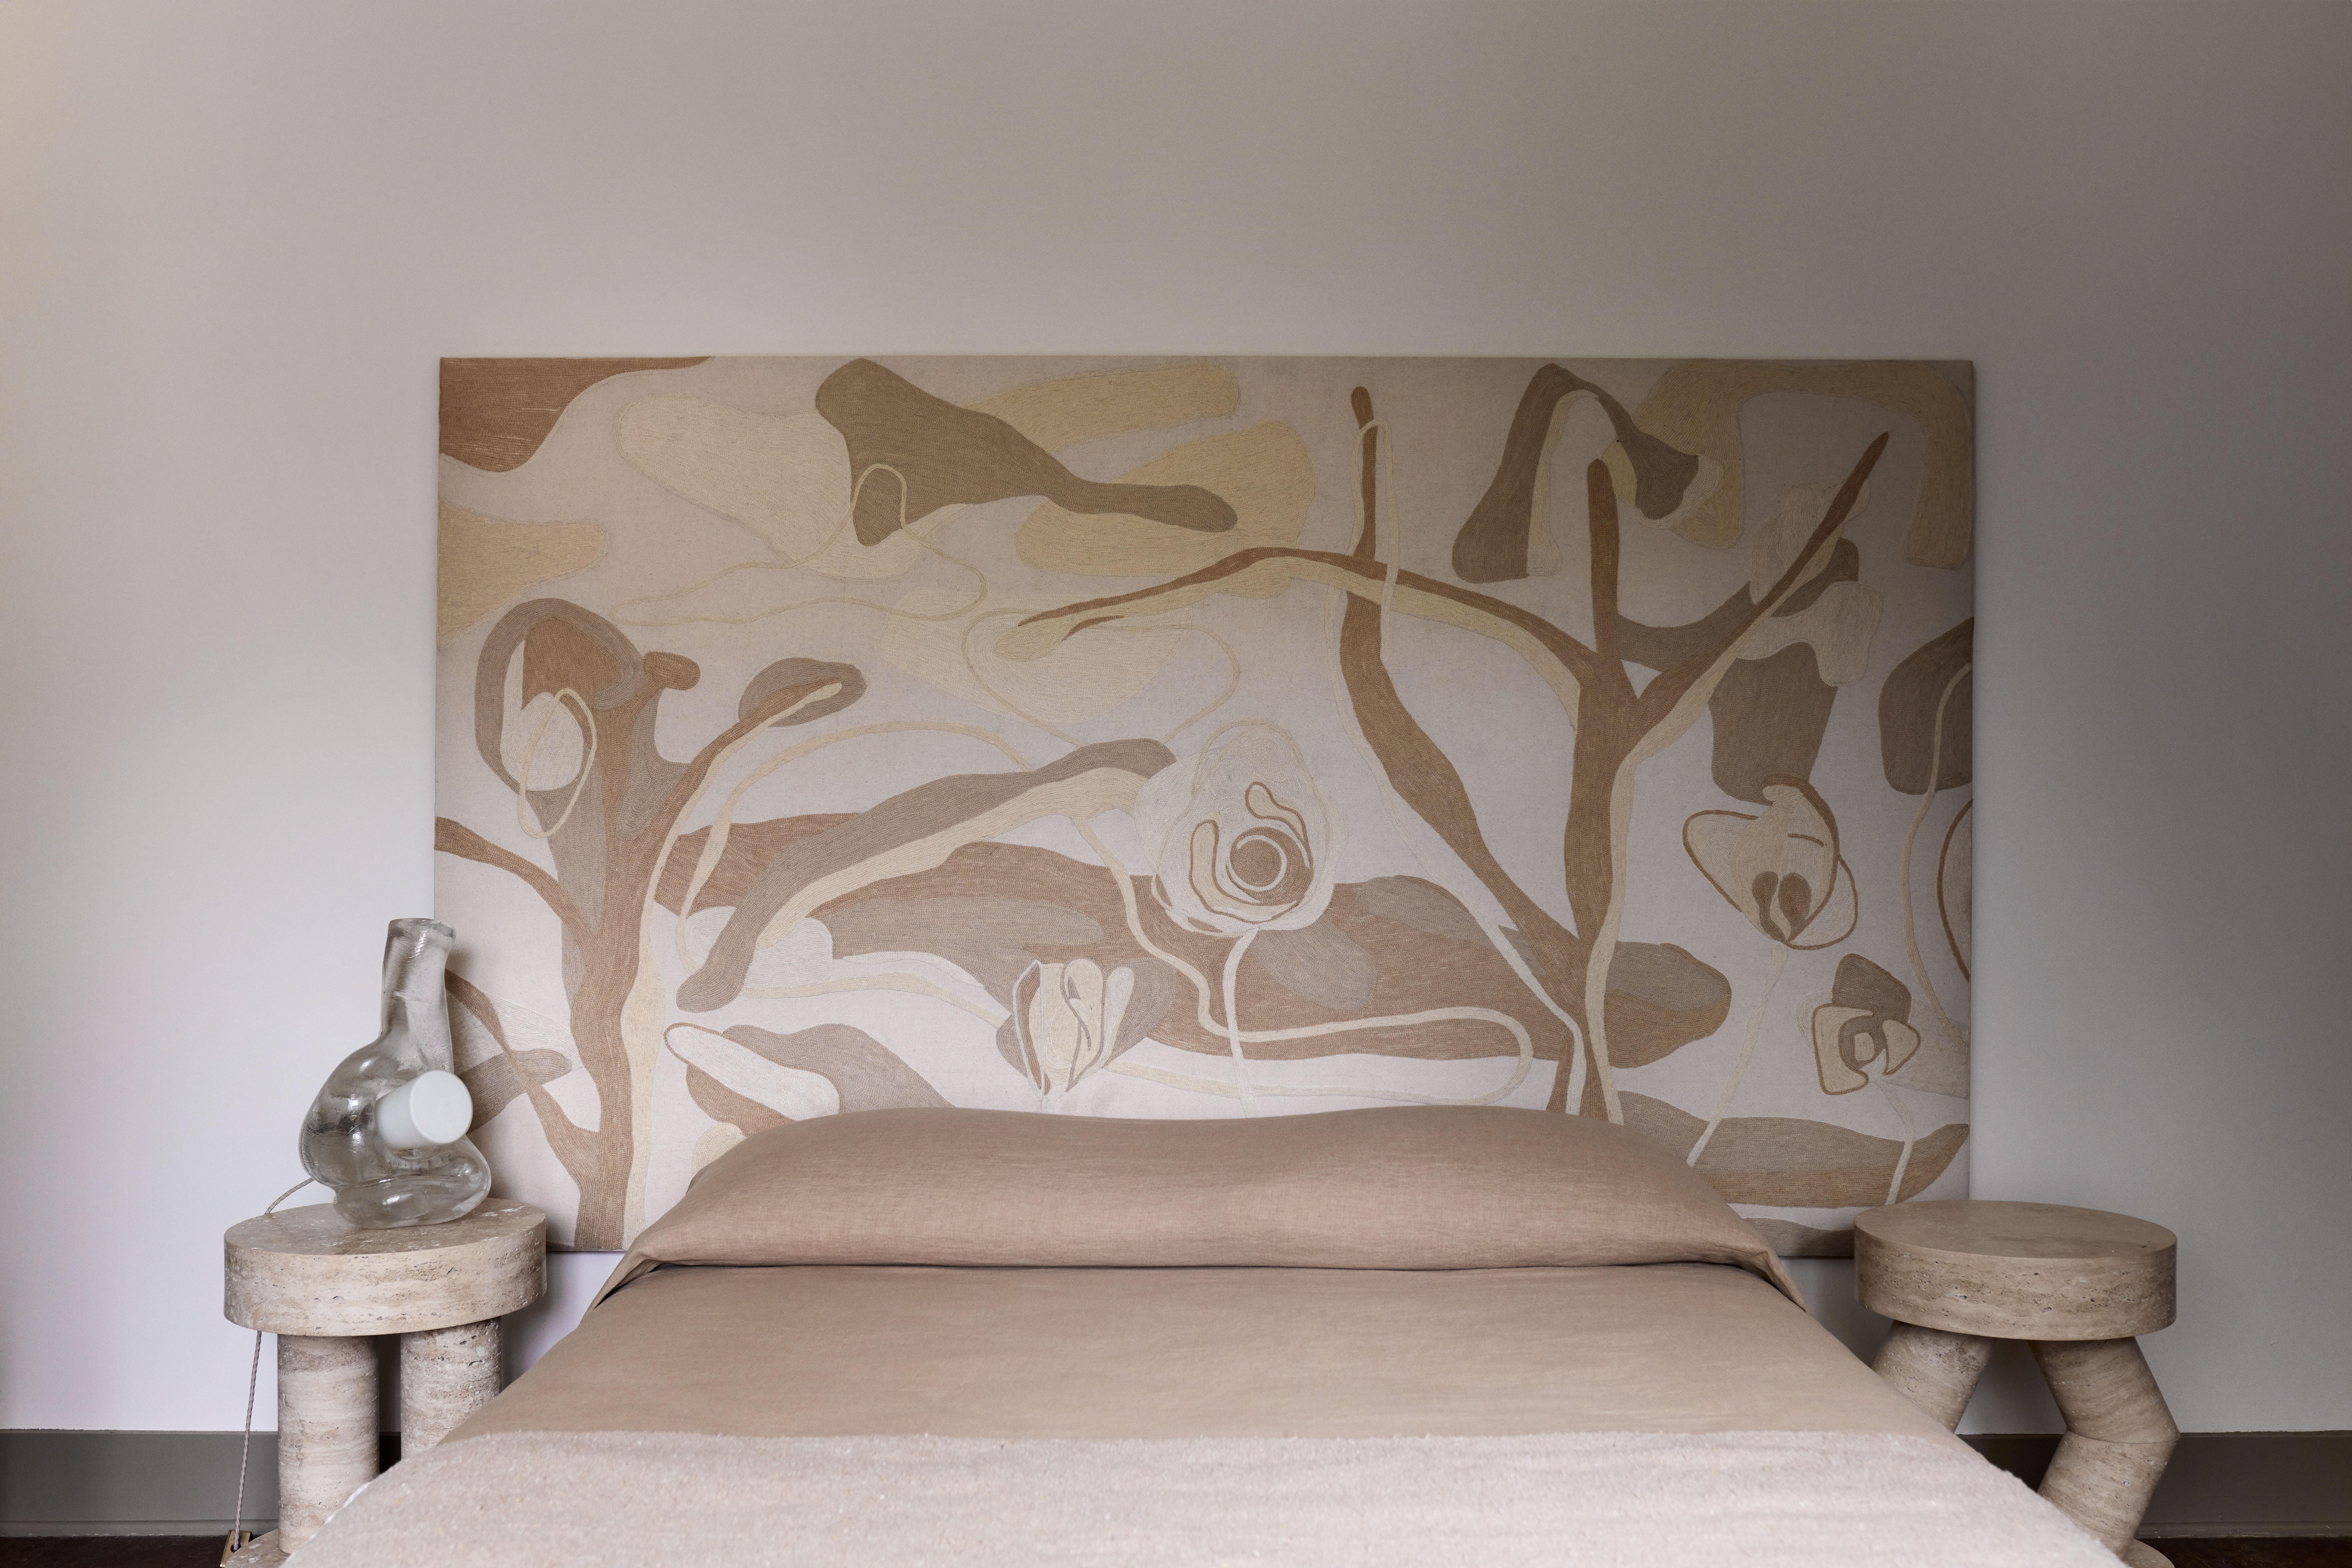 An abstract landscape of crewel embroidery, rendered in either a vibrant or neutral color palette.

Materials: Wool and Linen

Sizing and pricing:
Twin  52